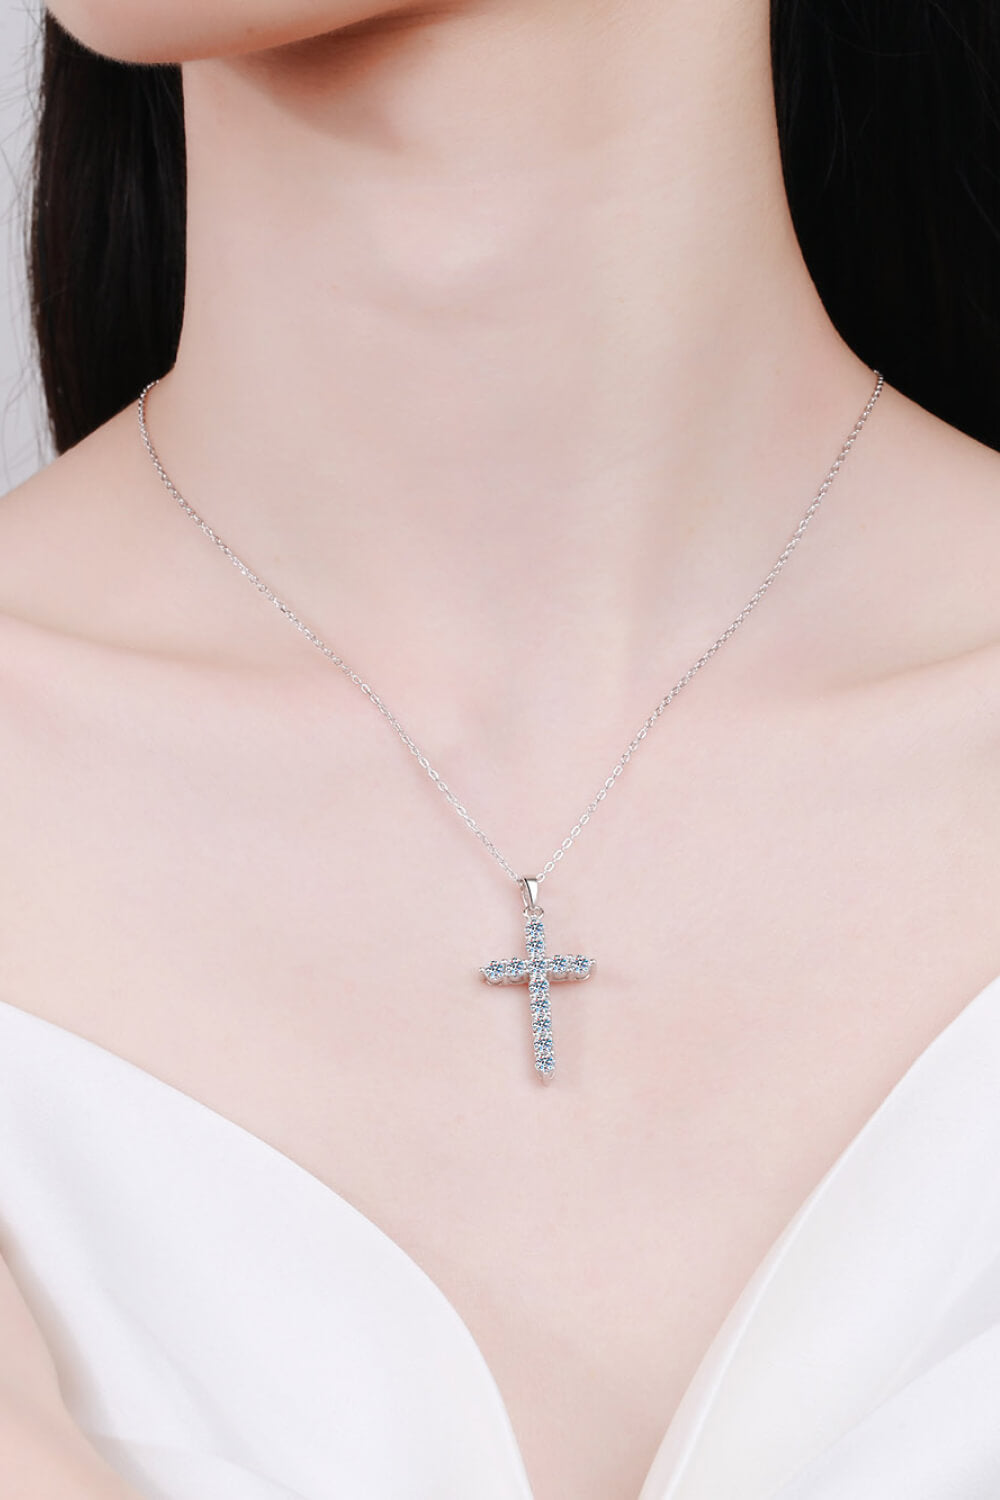 925 Sterling Silver Cross Moissanite Necklace - Tigbul's Fashion